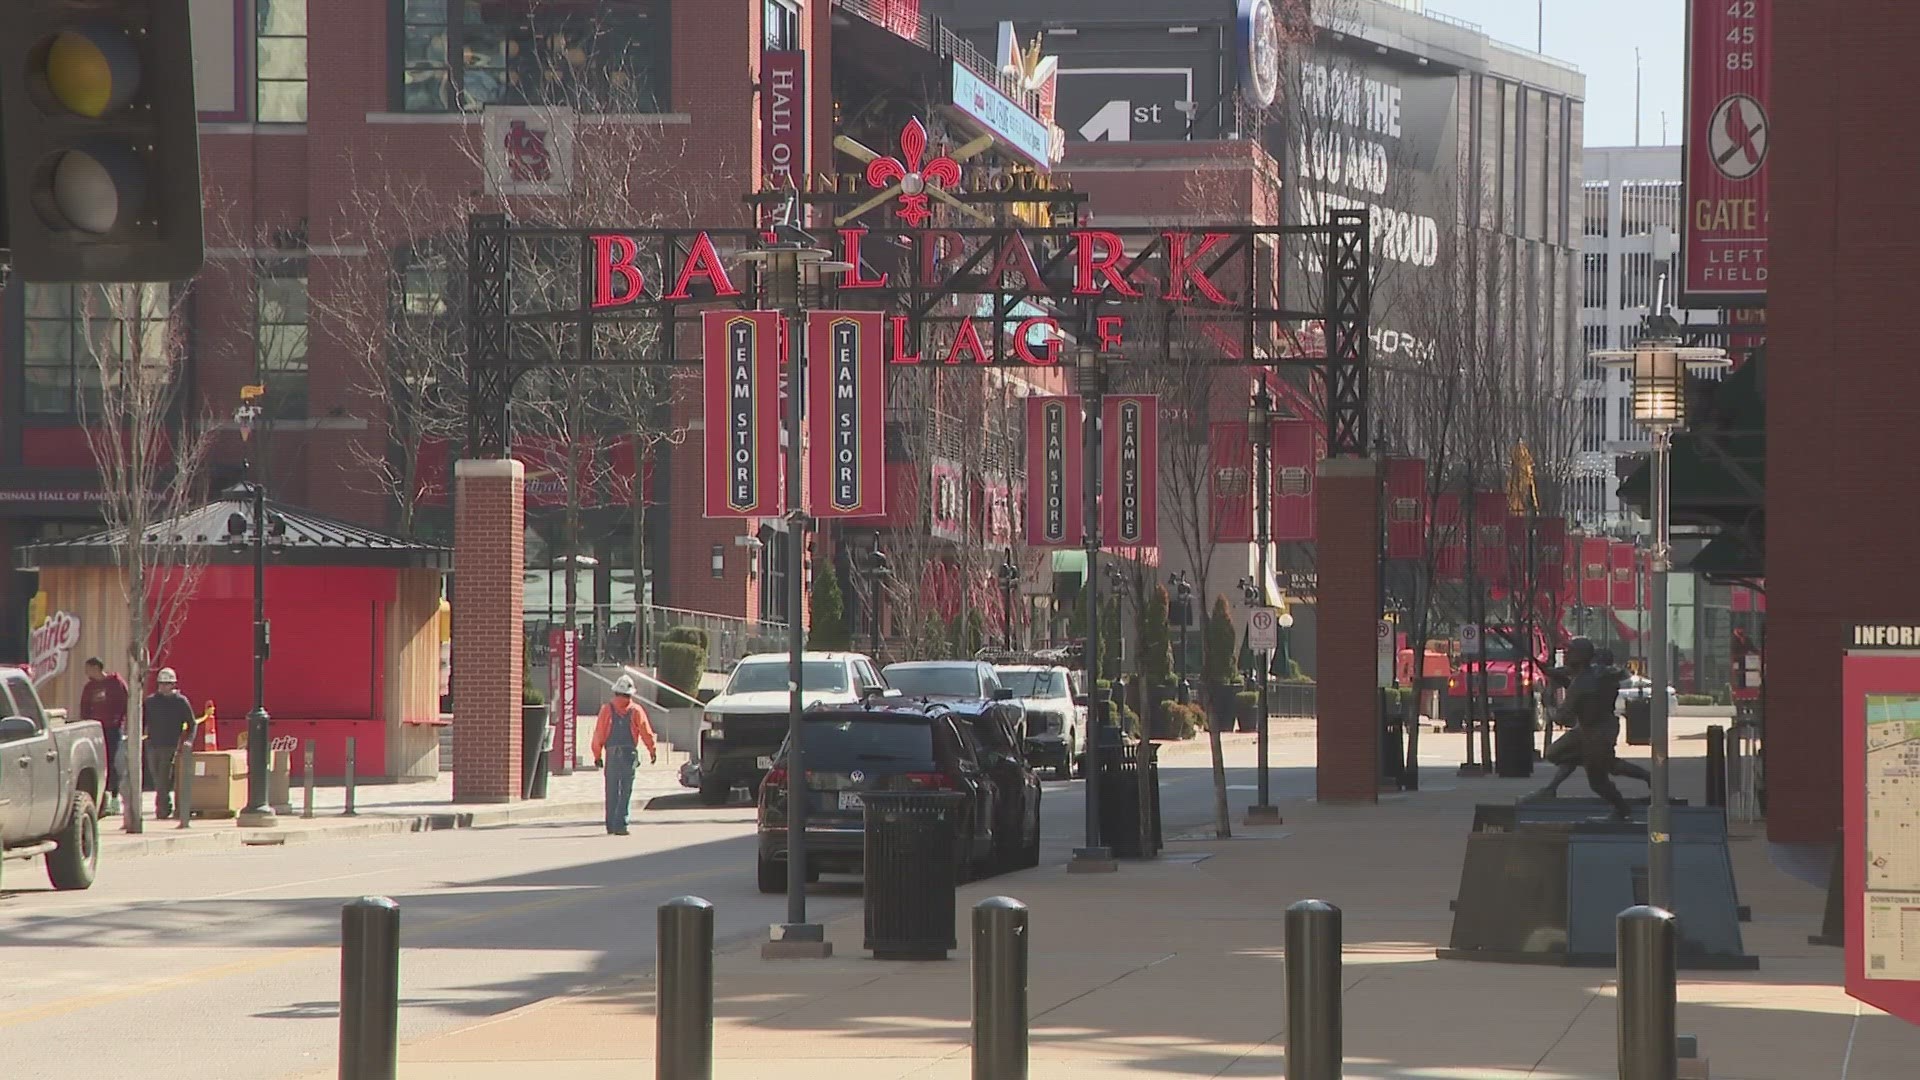 5 On Your Side's Travis Cummings visited Ballpark Village Wednesday afternoon. He provides the details on safety preparations.